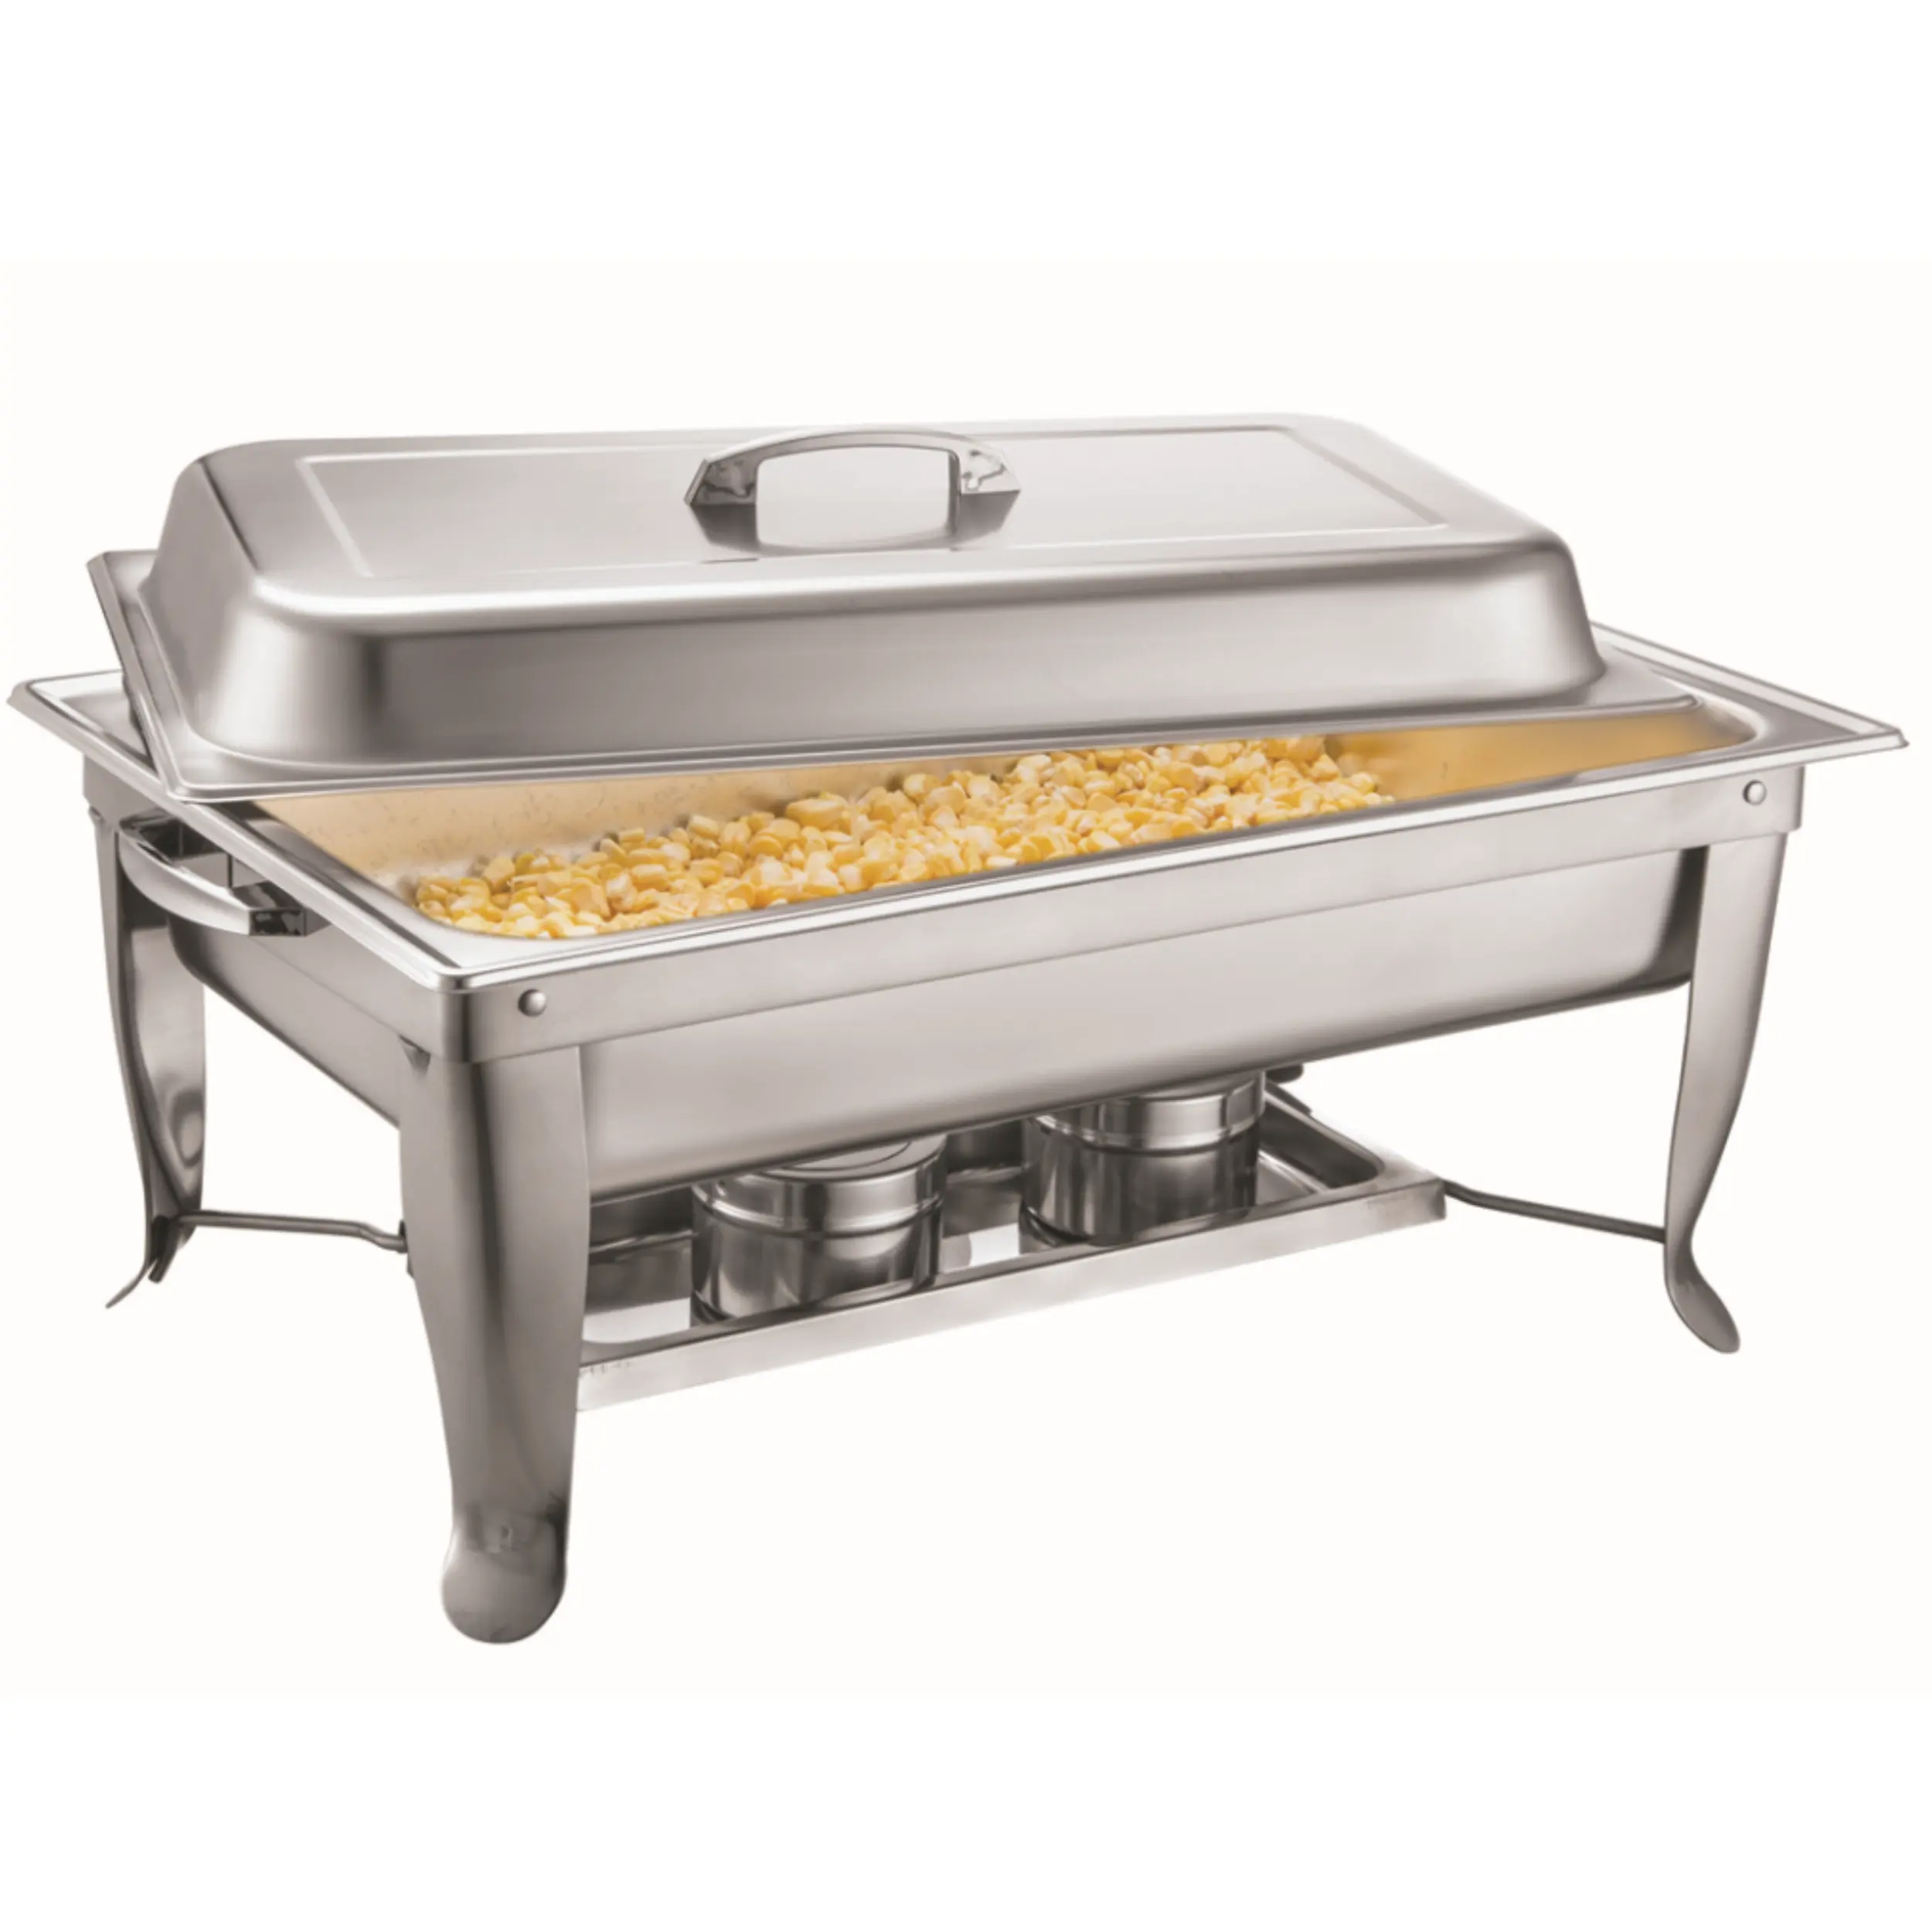 Buphex SS201 High Quality Economy Chafer 9L 533-2 Foldable Chafing Dish 8L with GN1/2x2 Food warmer for hotel restaurant  buffet